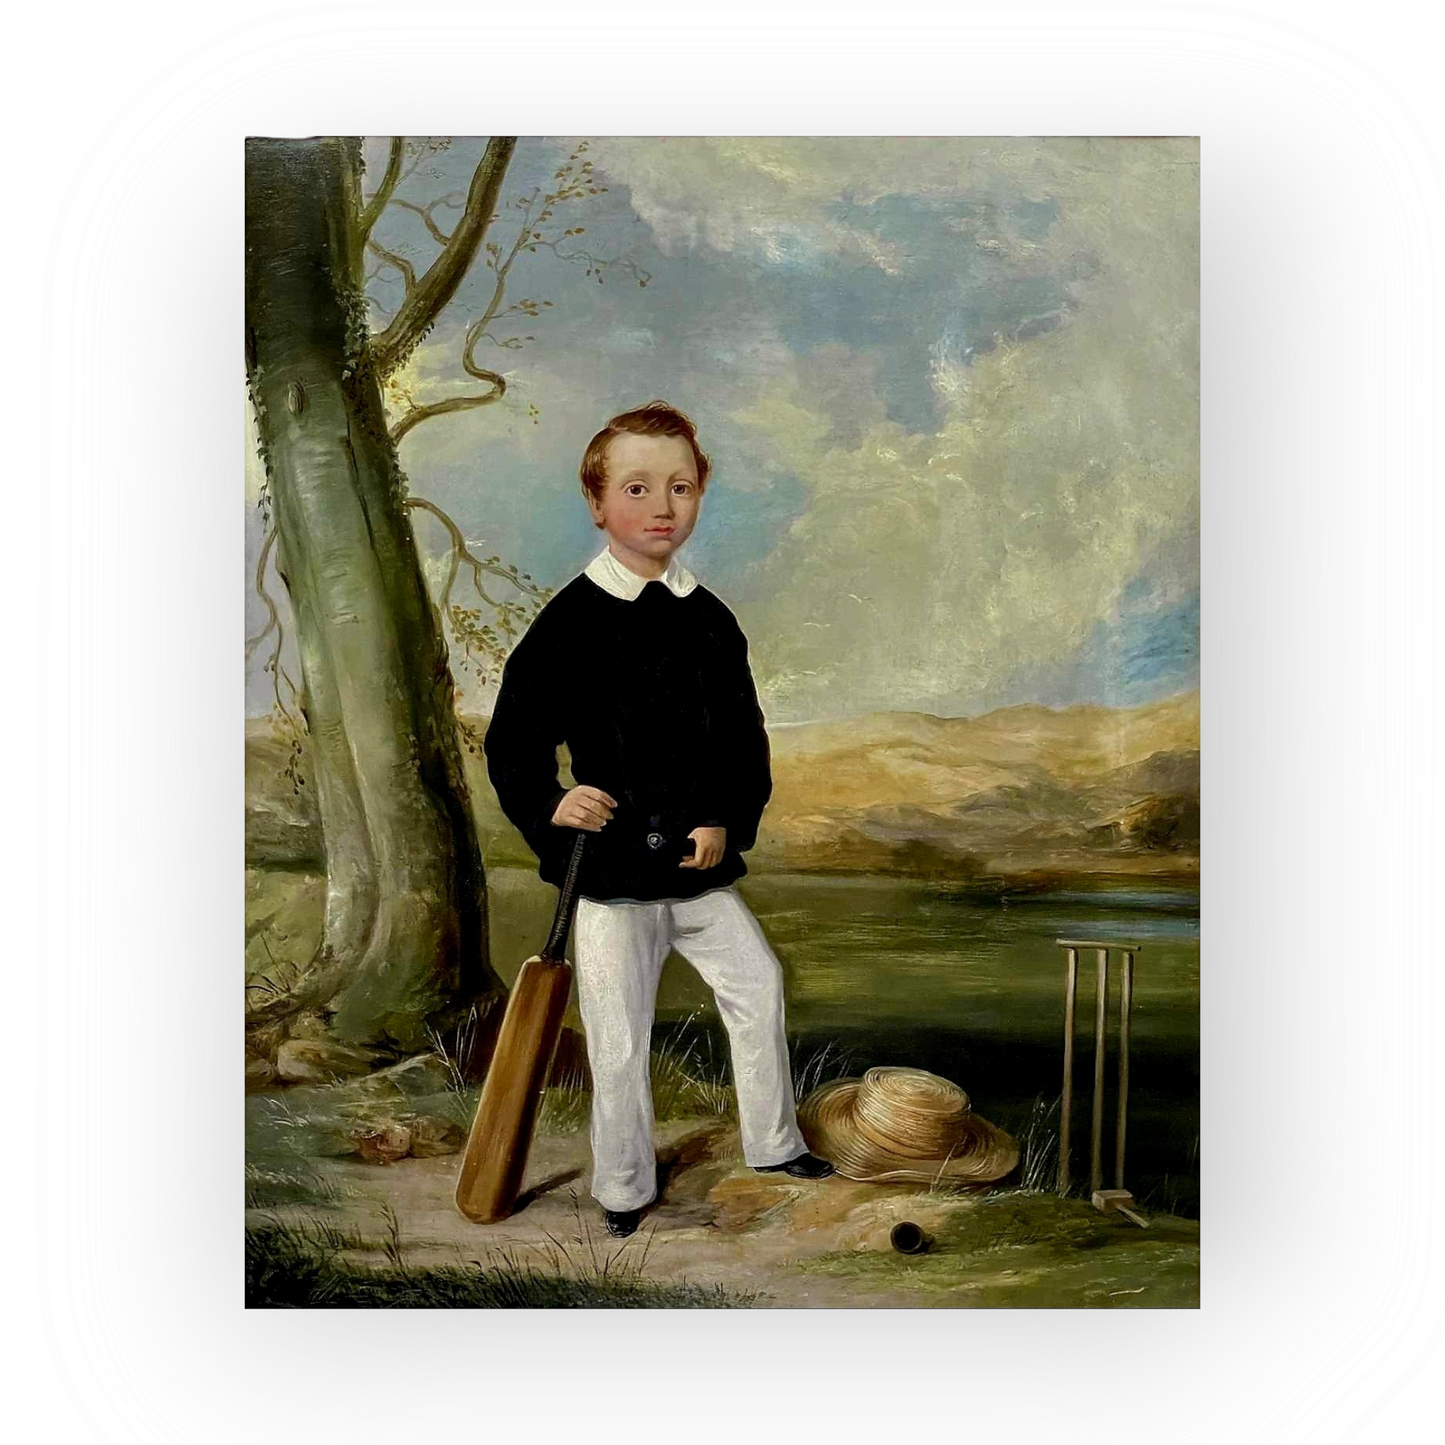 Large Mid-19th Century English Antique Oil on Canvas Entitled "The Young Cricketer" Signed "W.J.Chapman" & Dated "1856"